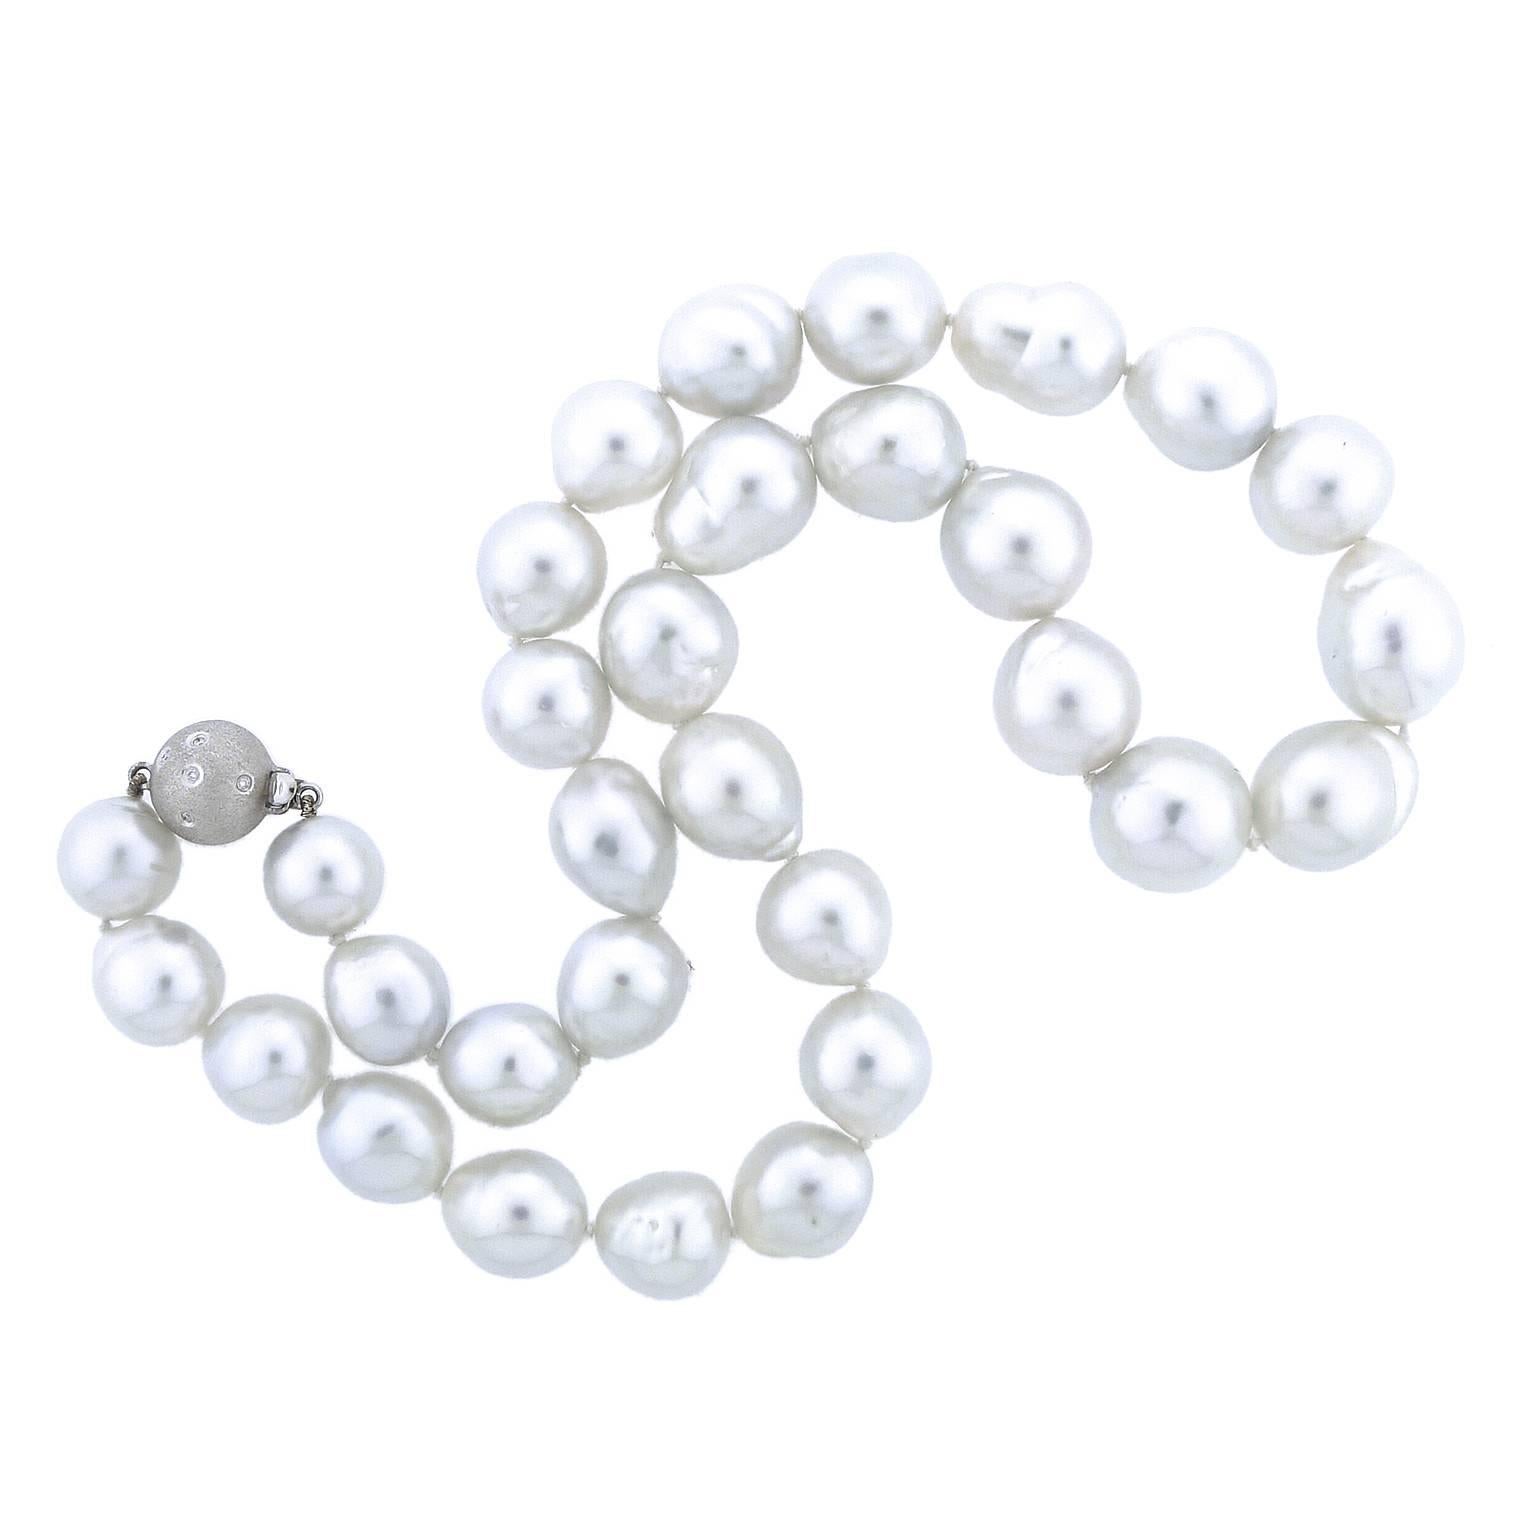 T. Foster & Co. South Sea Pearl Necklace with Diamond Accented Clasp In New Condition For Sale In Yardley, PA